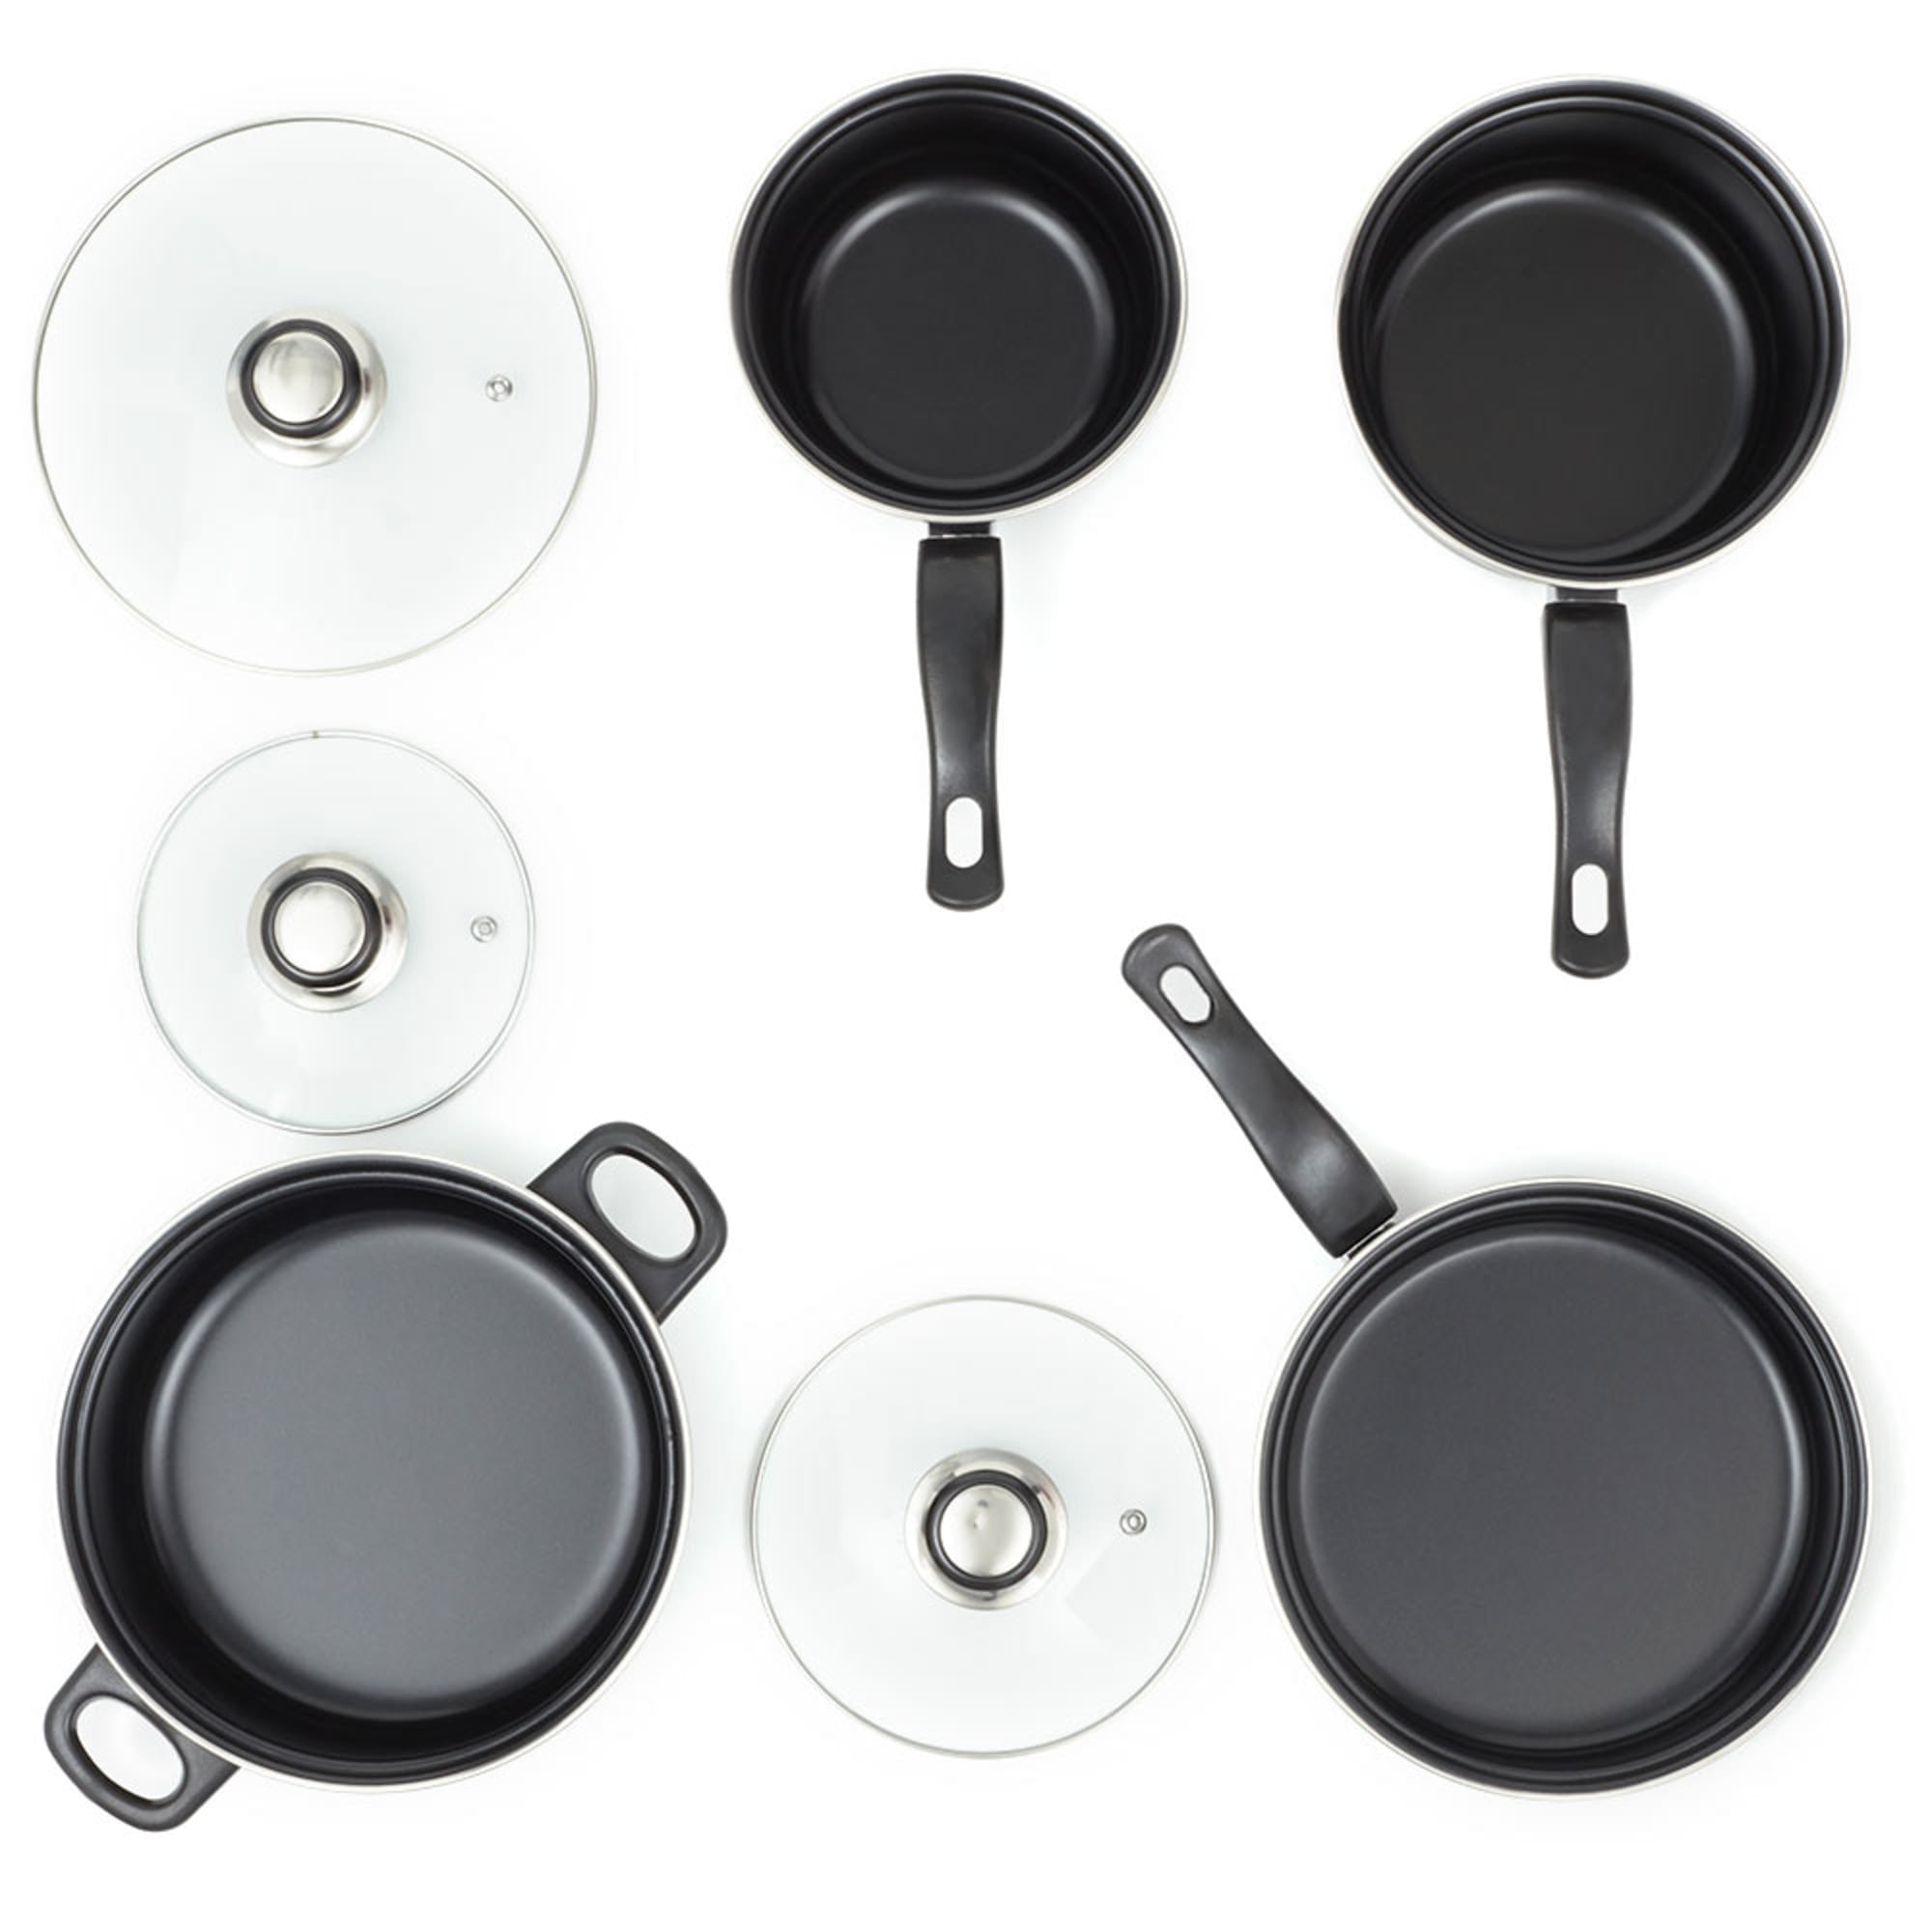 Buy High Quality 7 Pcs Carbon Steel Nonstick Cookware Cooking Kitchen Pots  And Pans Set Non Stick Cookware Sets from Zhejiang Longhe Industry Trading  Co., Ltd., China